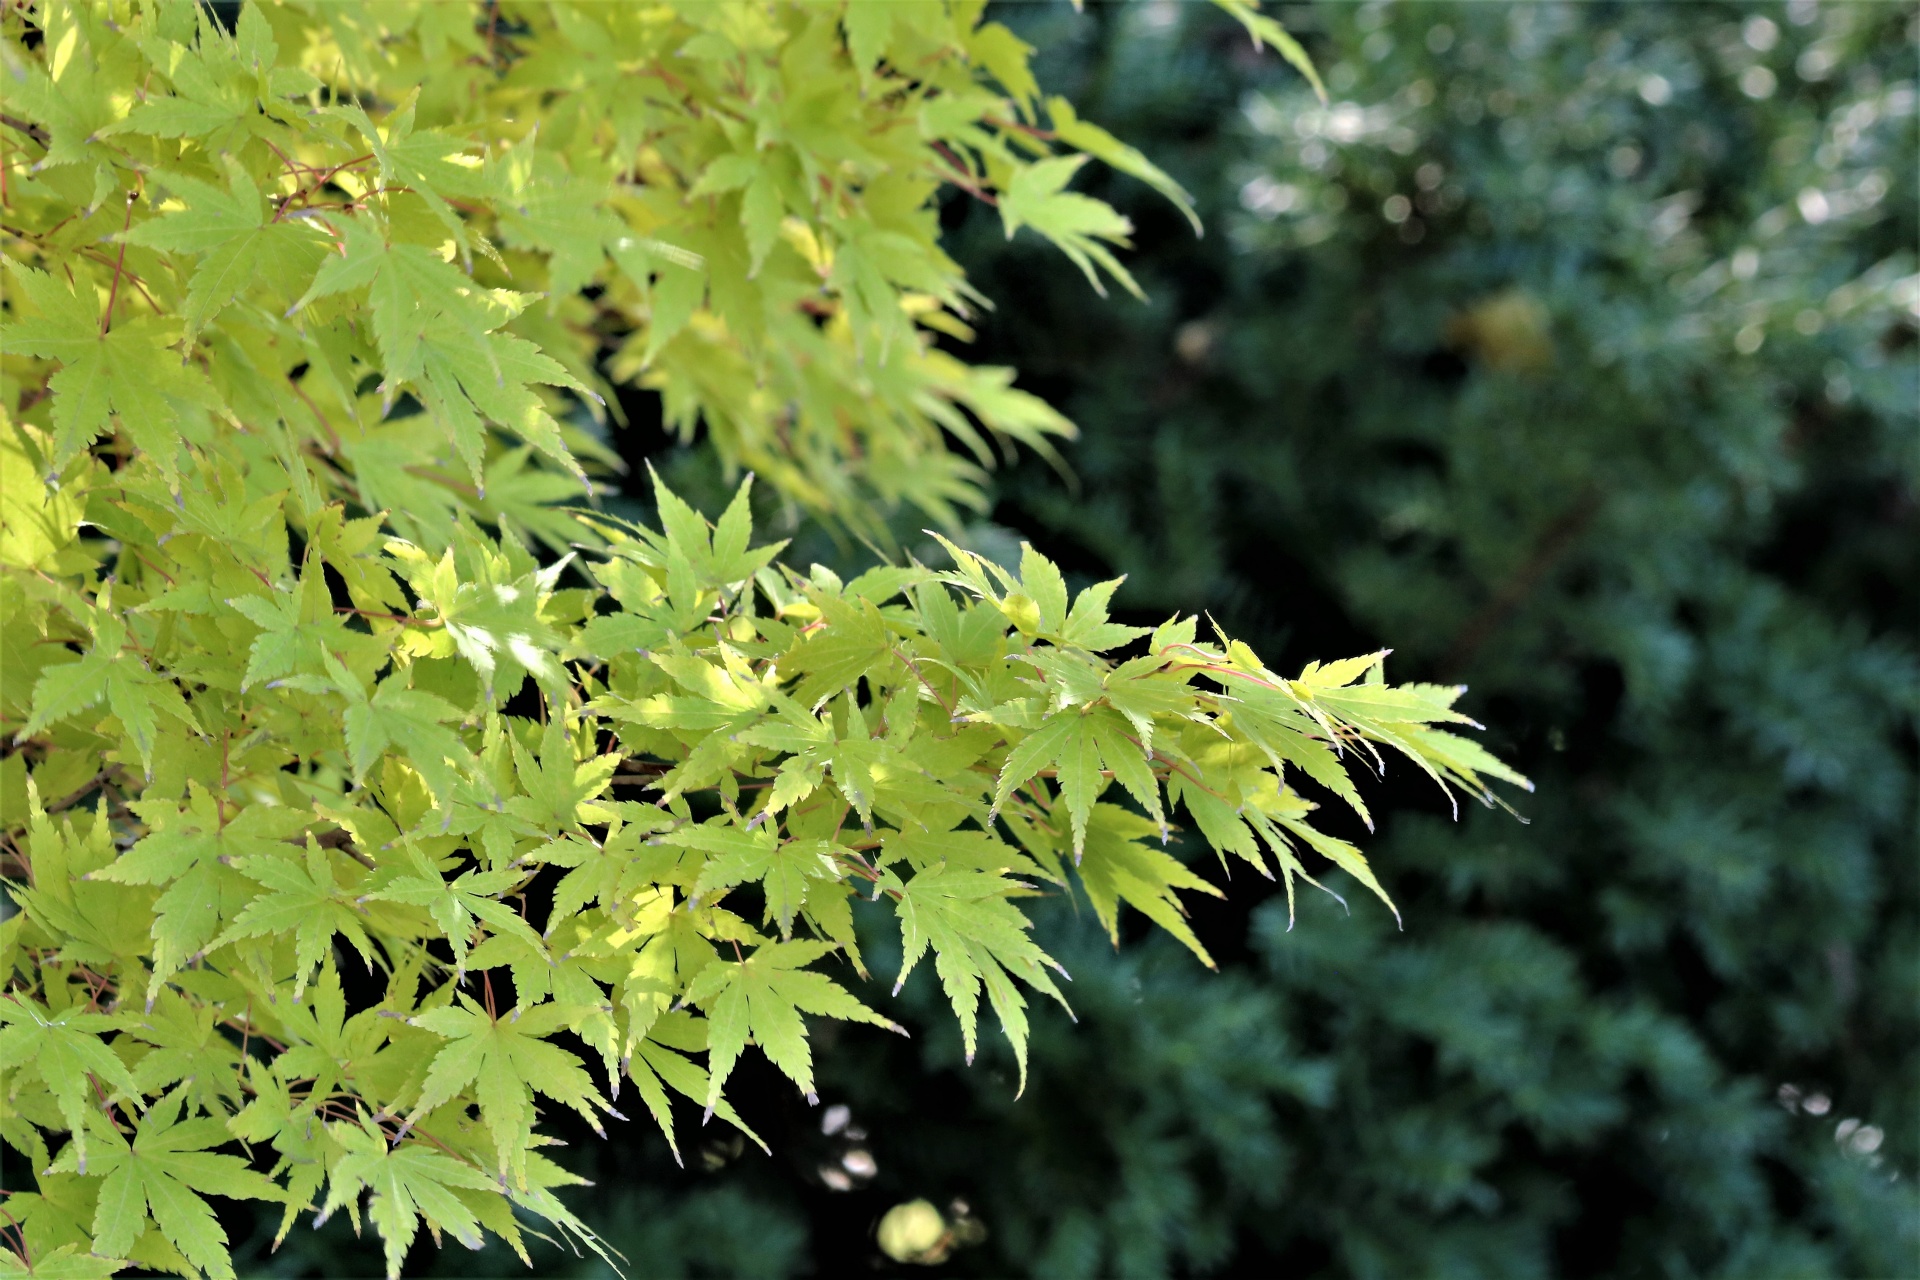 The beautiful bright yellow leaves of a maple tree in fall seem to be reaching out into the dark green leaves of oak trees in the background.